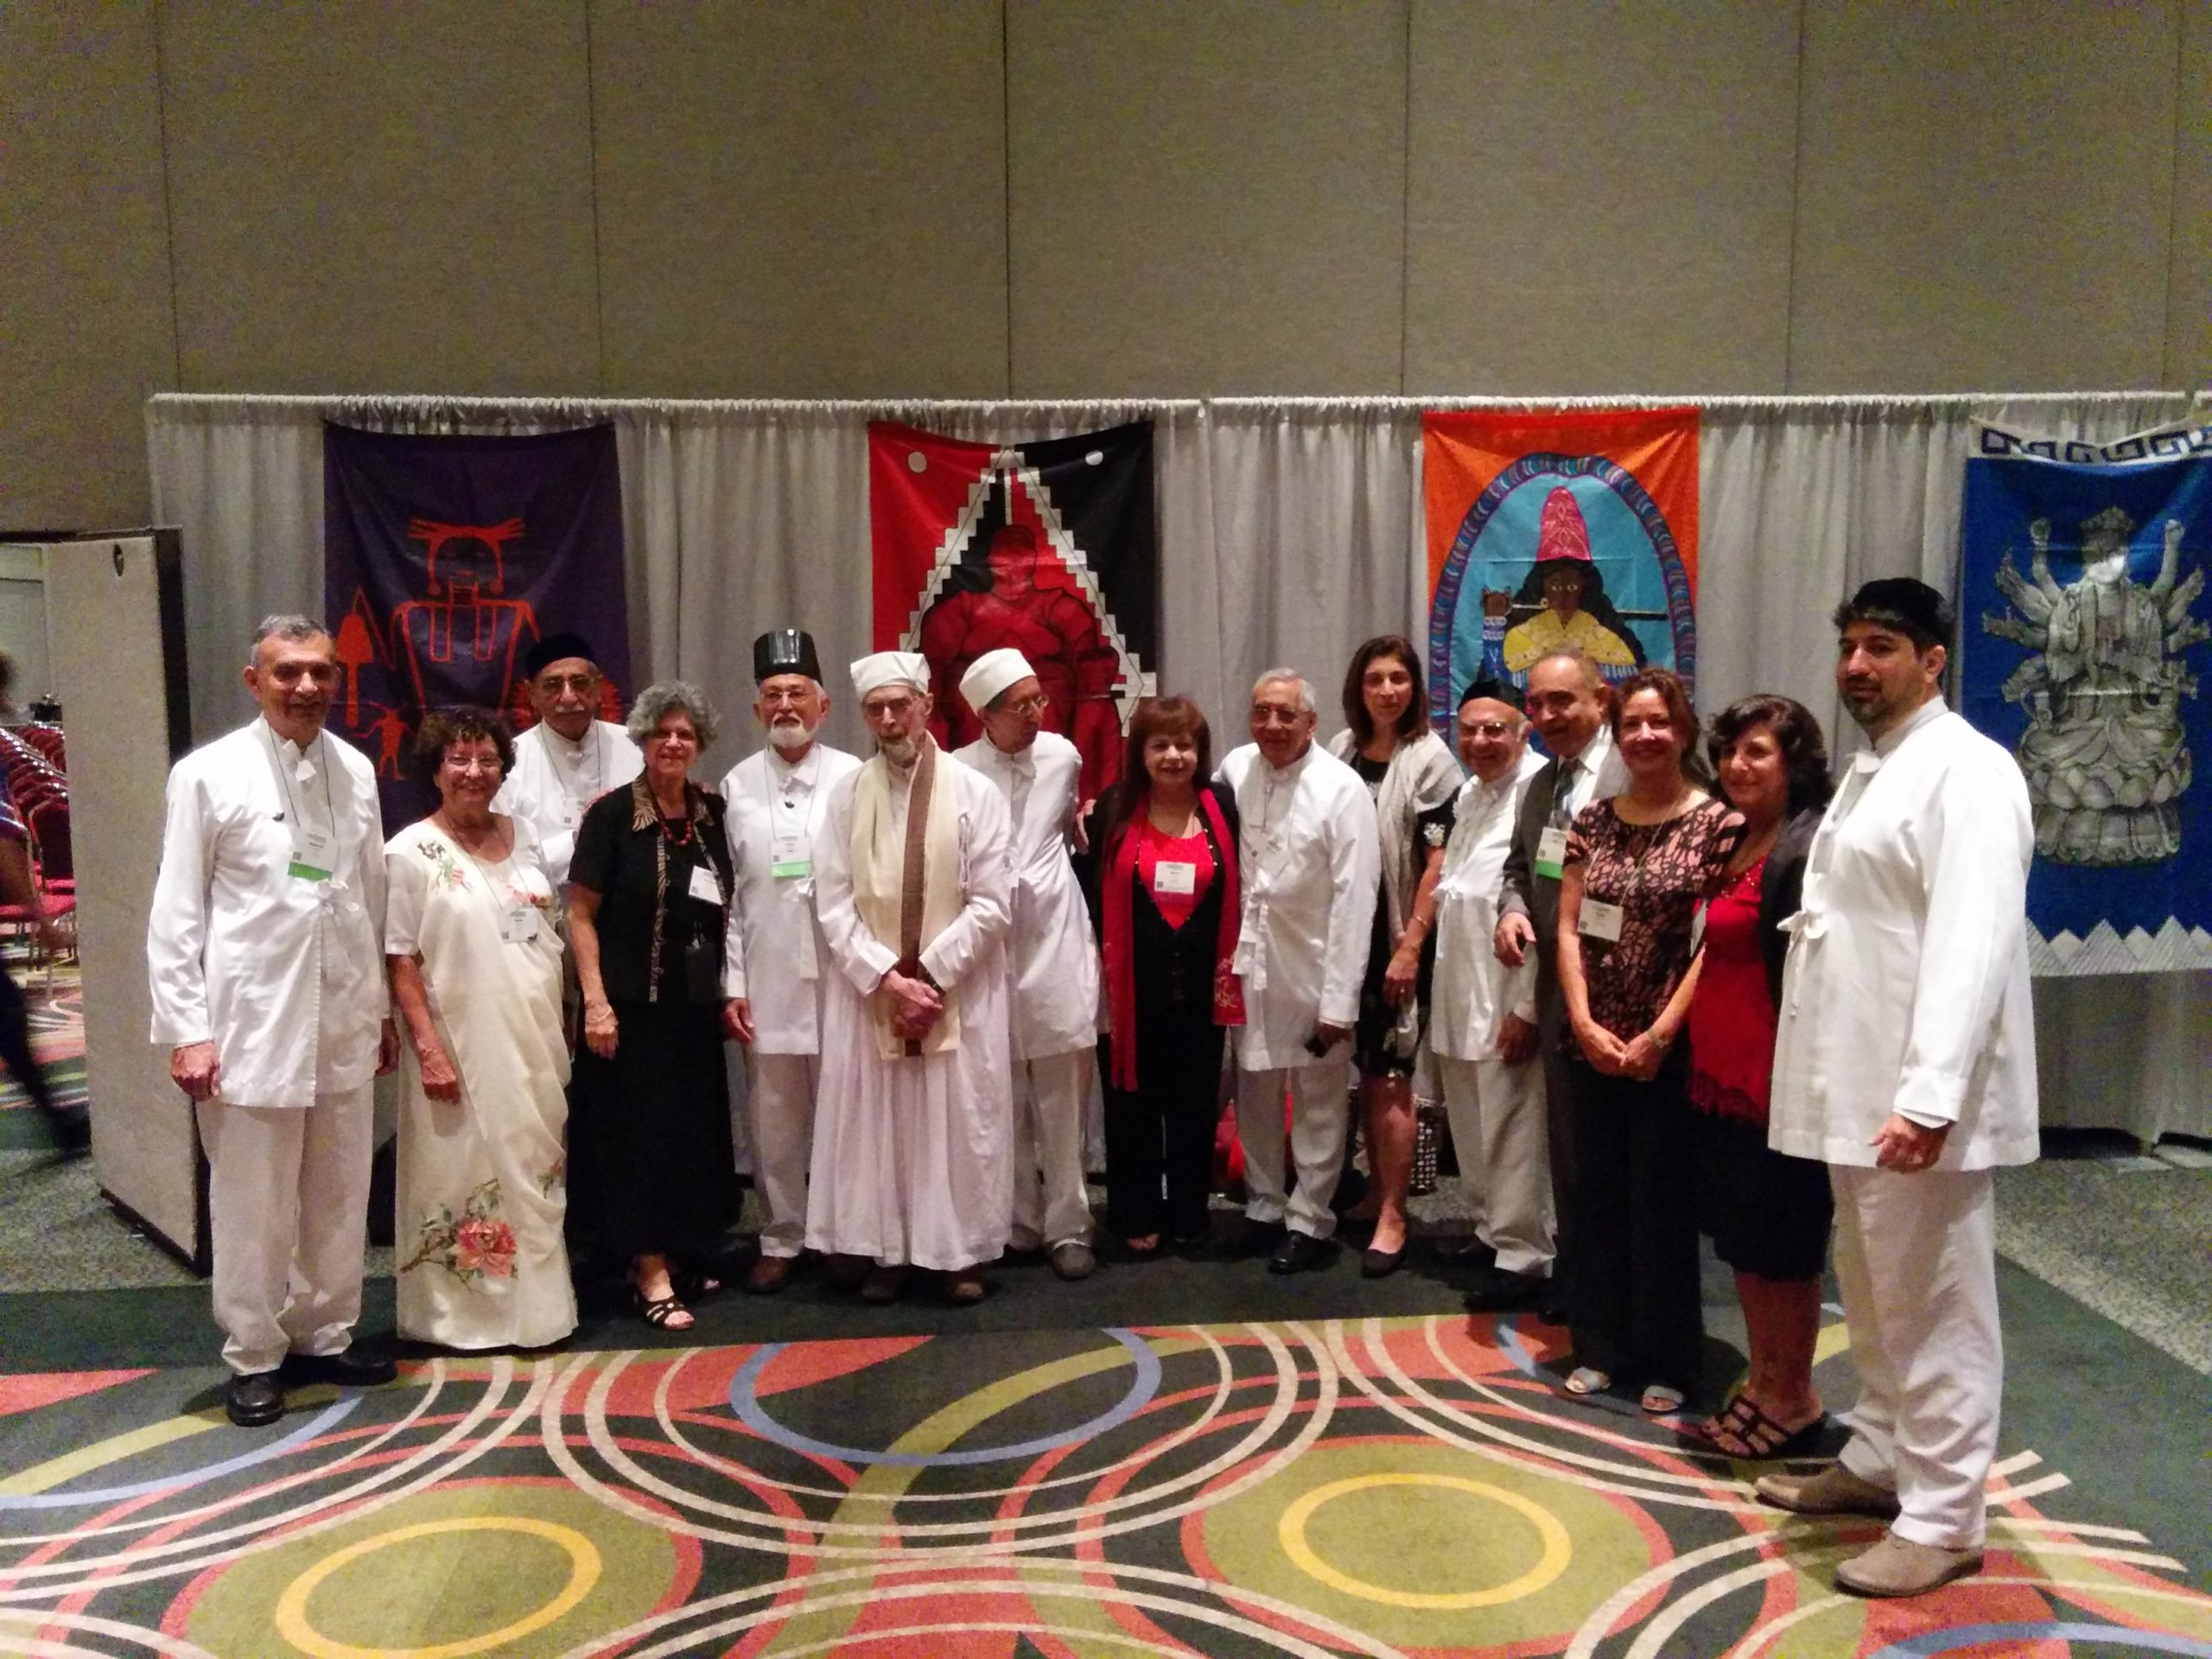 Zoroastrian Presence at the 2015 Parliament of World’s Religions